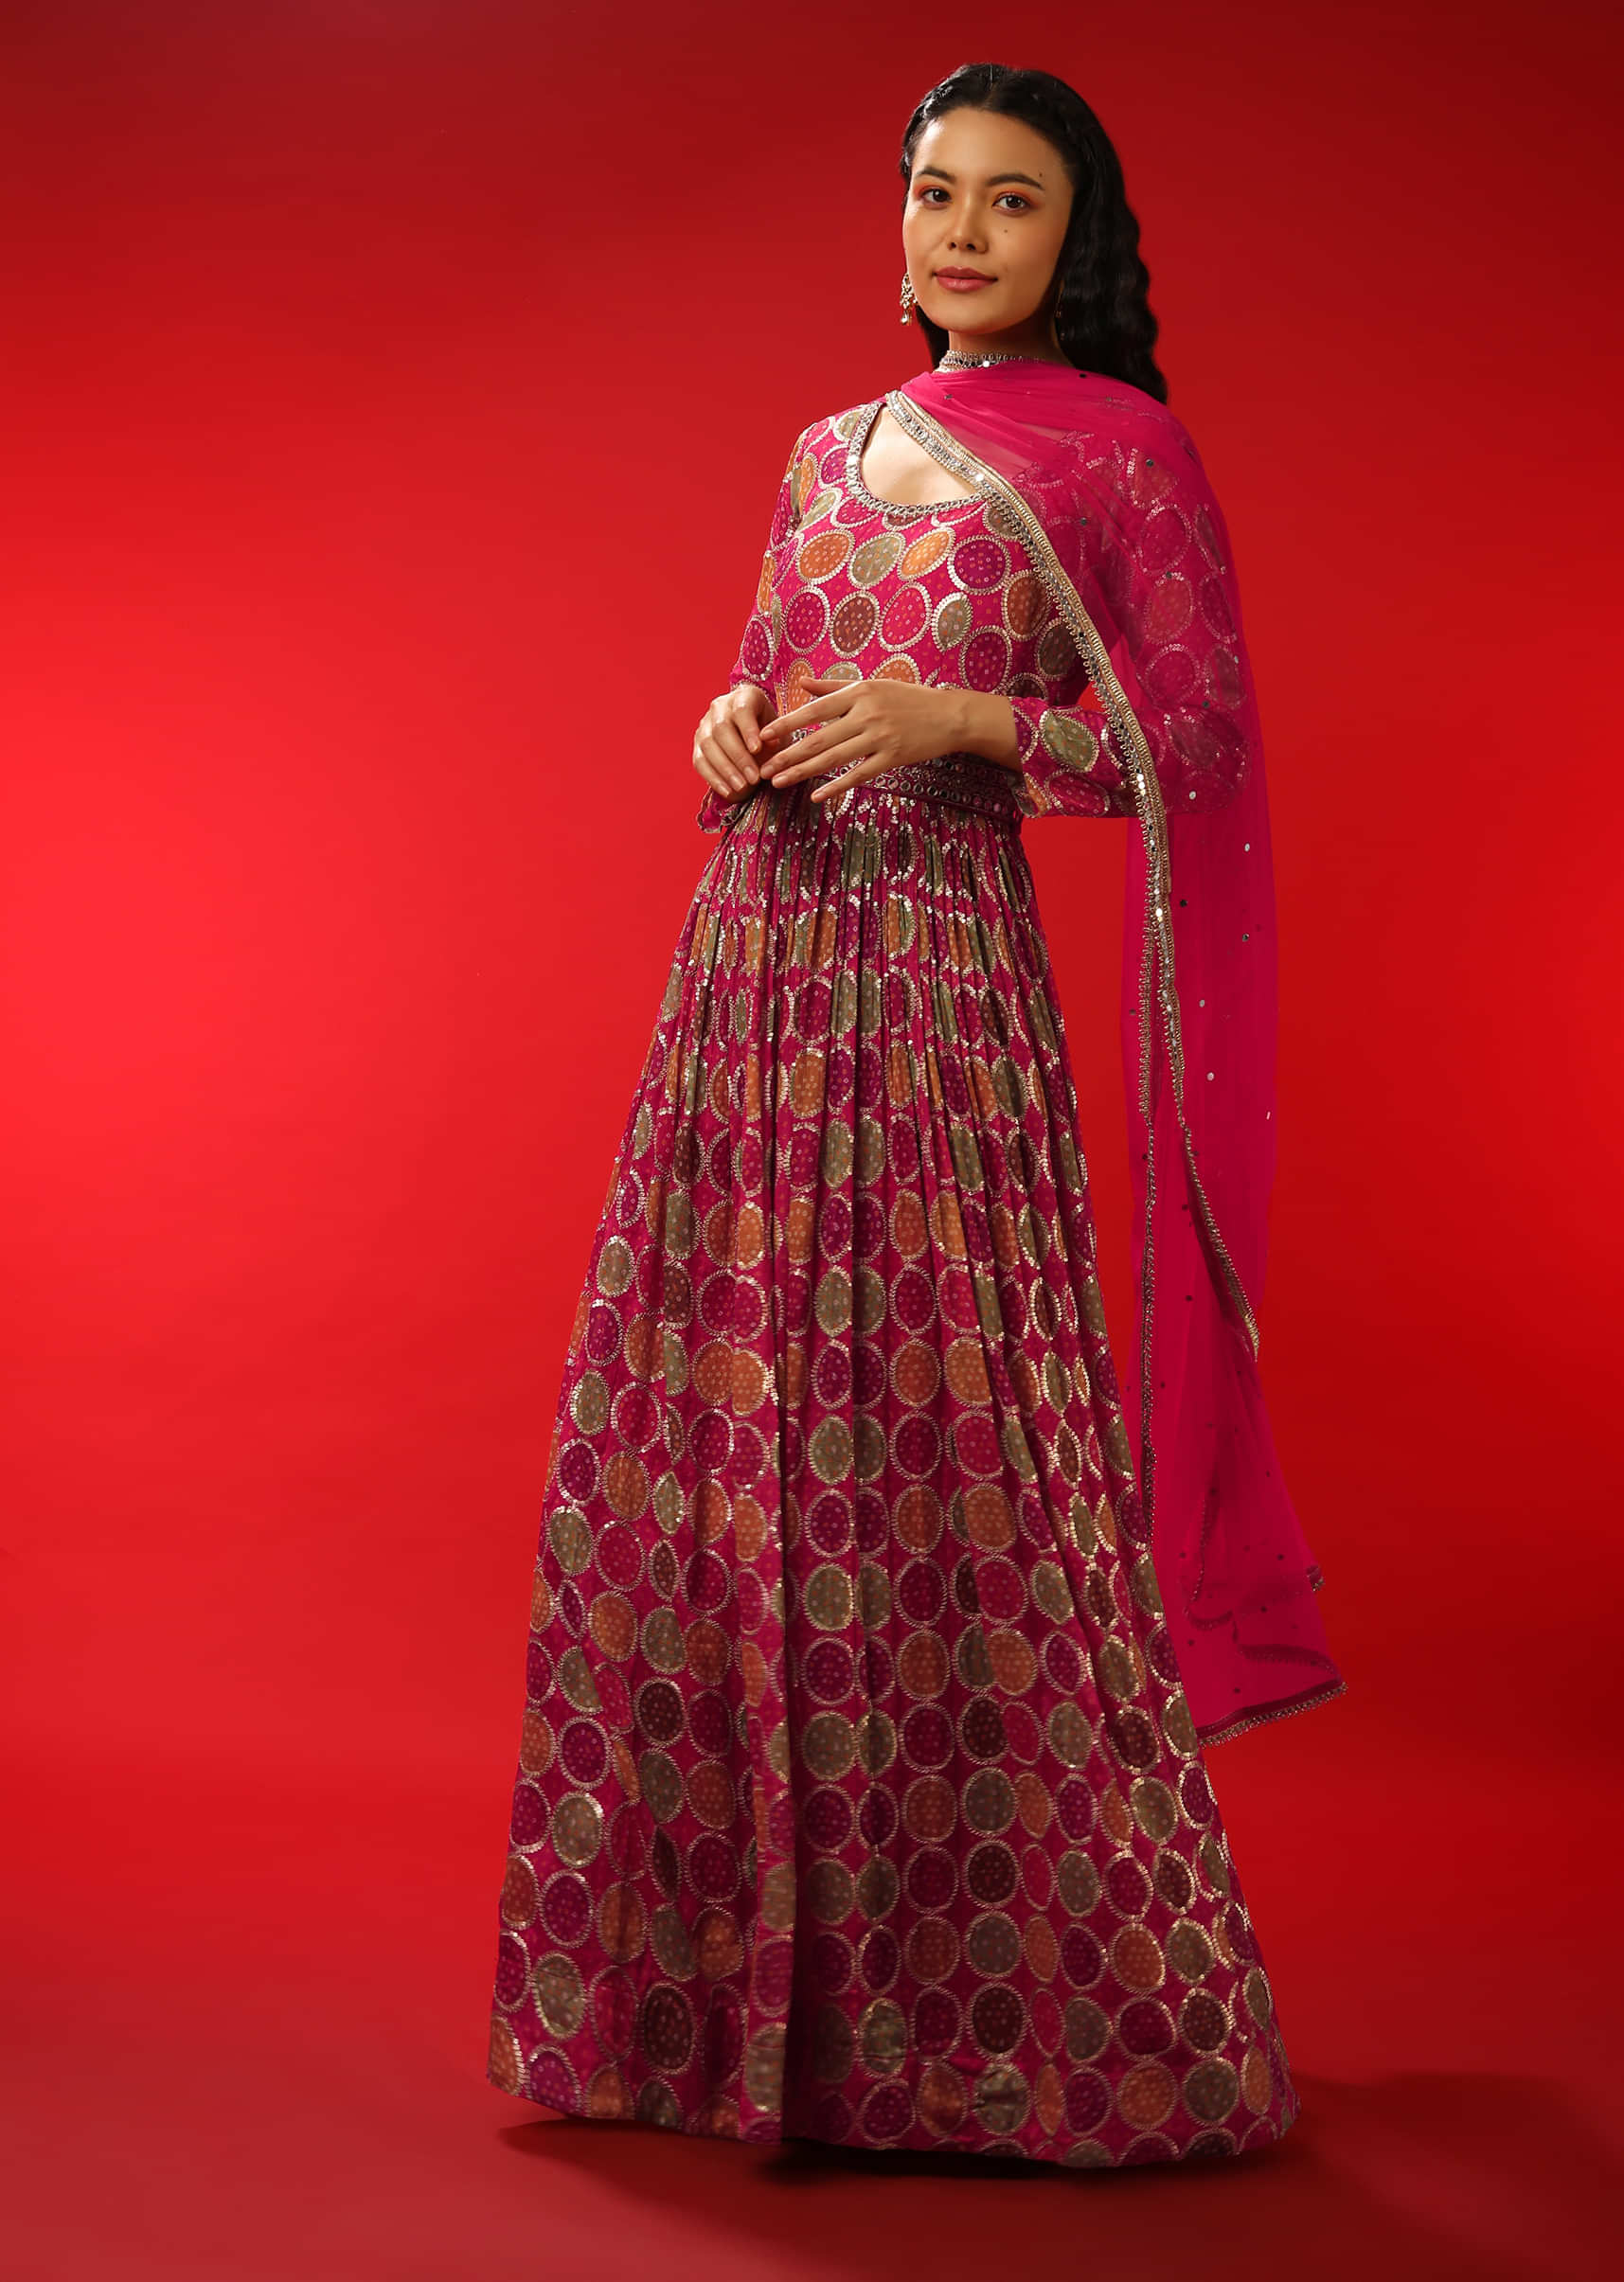 Rani Pink Anarkali Suit In Georgette With Bandhani Print And Multi Colored Circles  